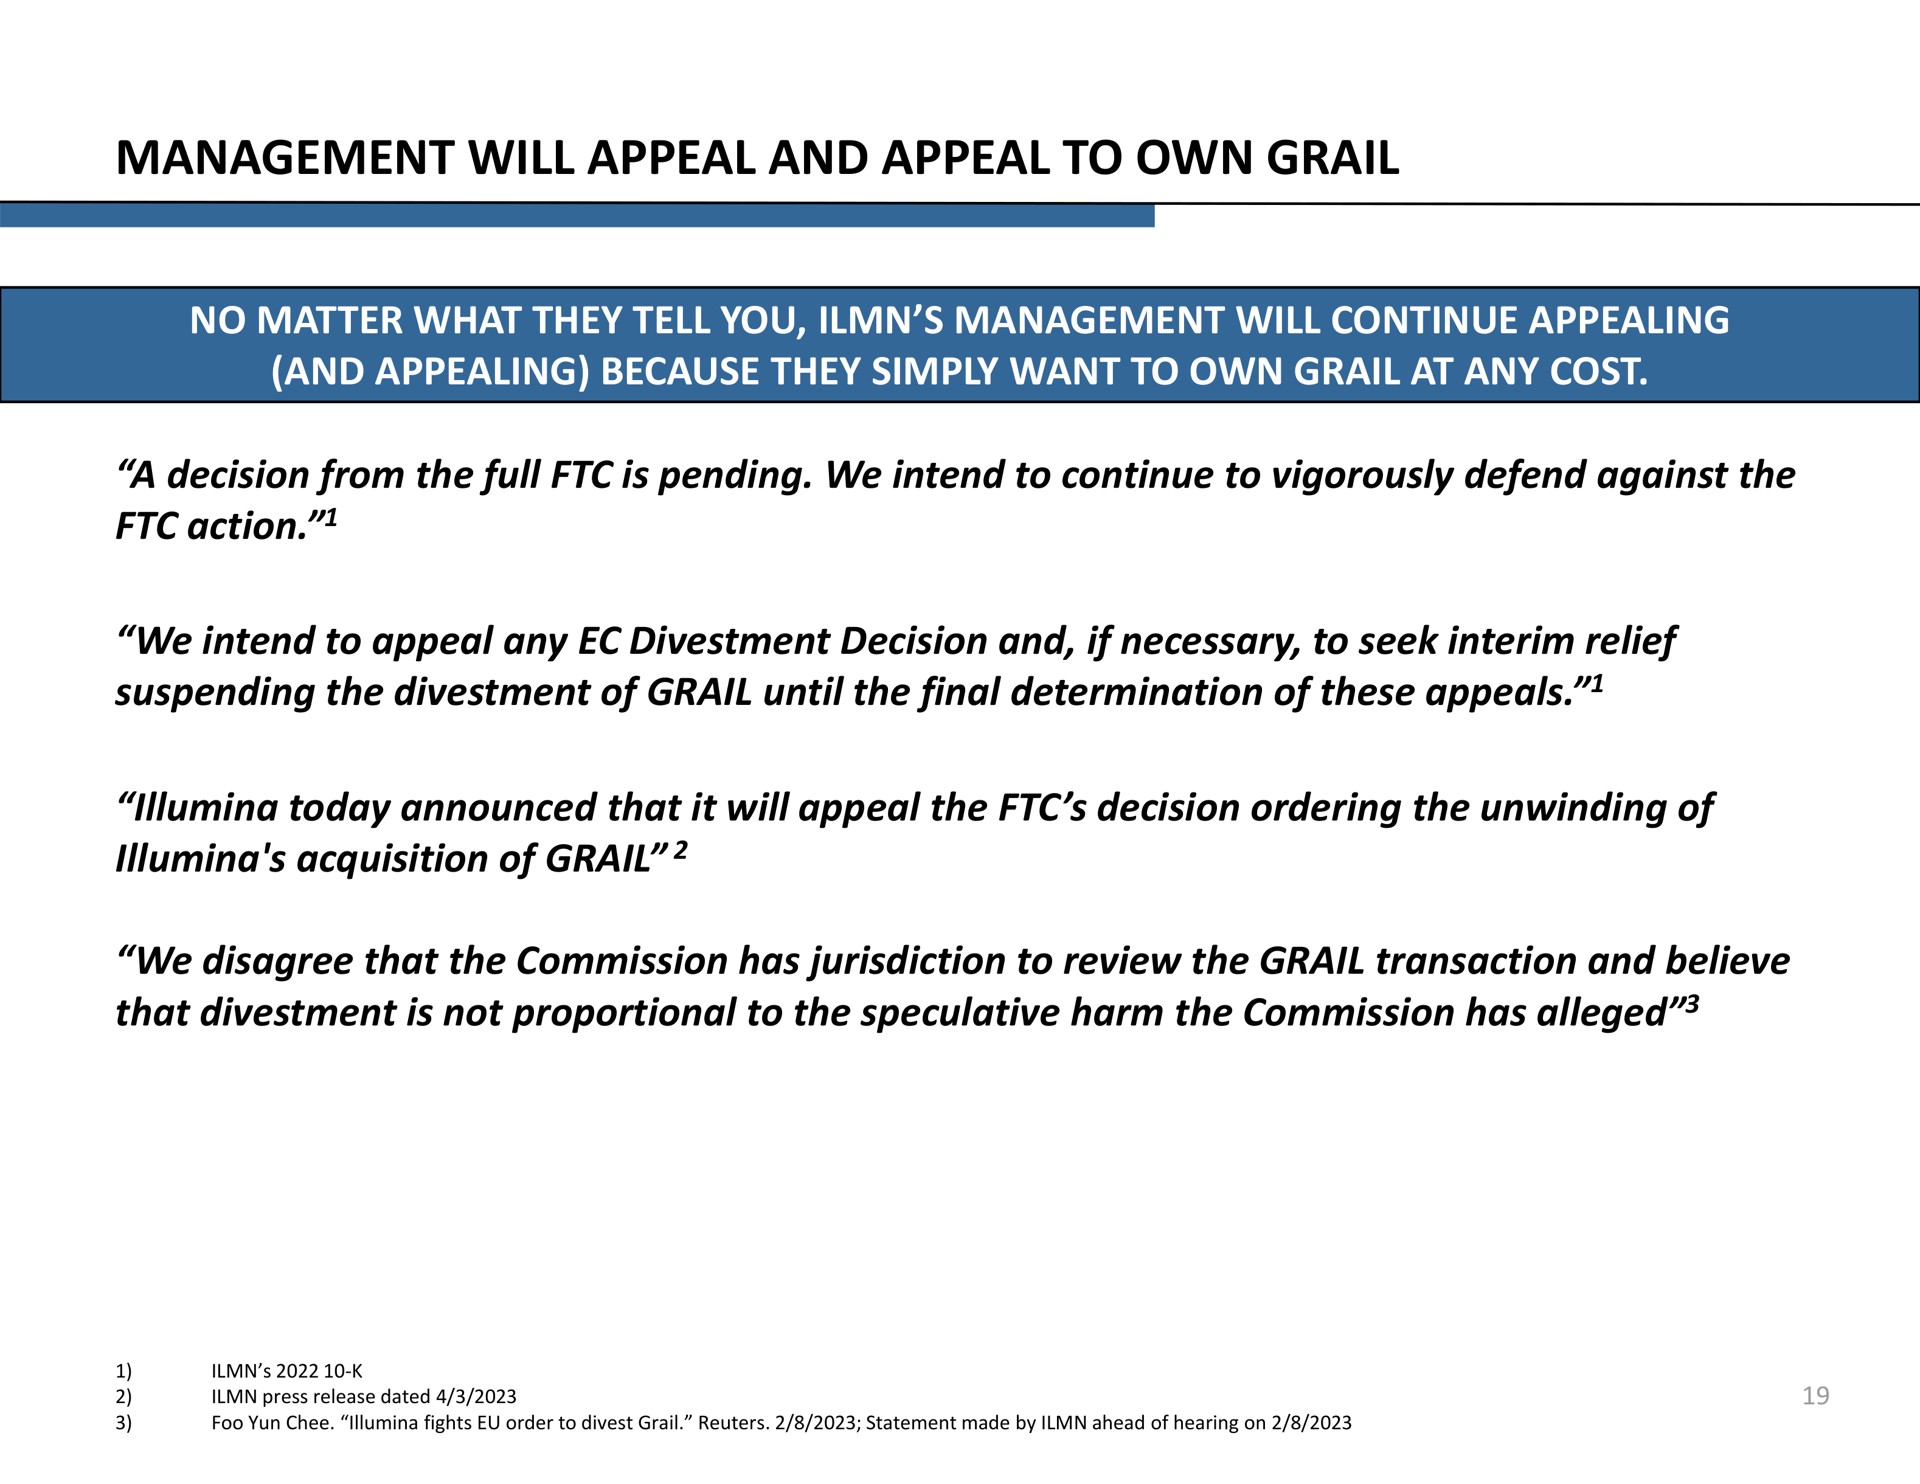 management will appeal and appeal to own grail today announced that it the decision ordering the unwinding of acquisition of | Icahn Enterprises